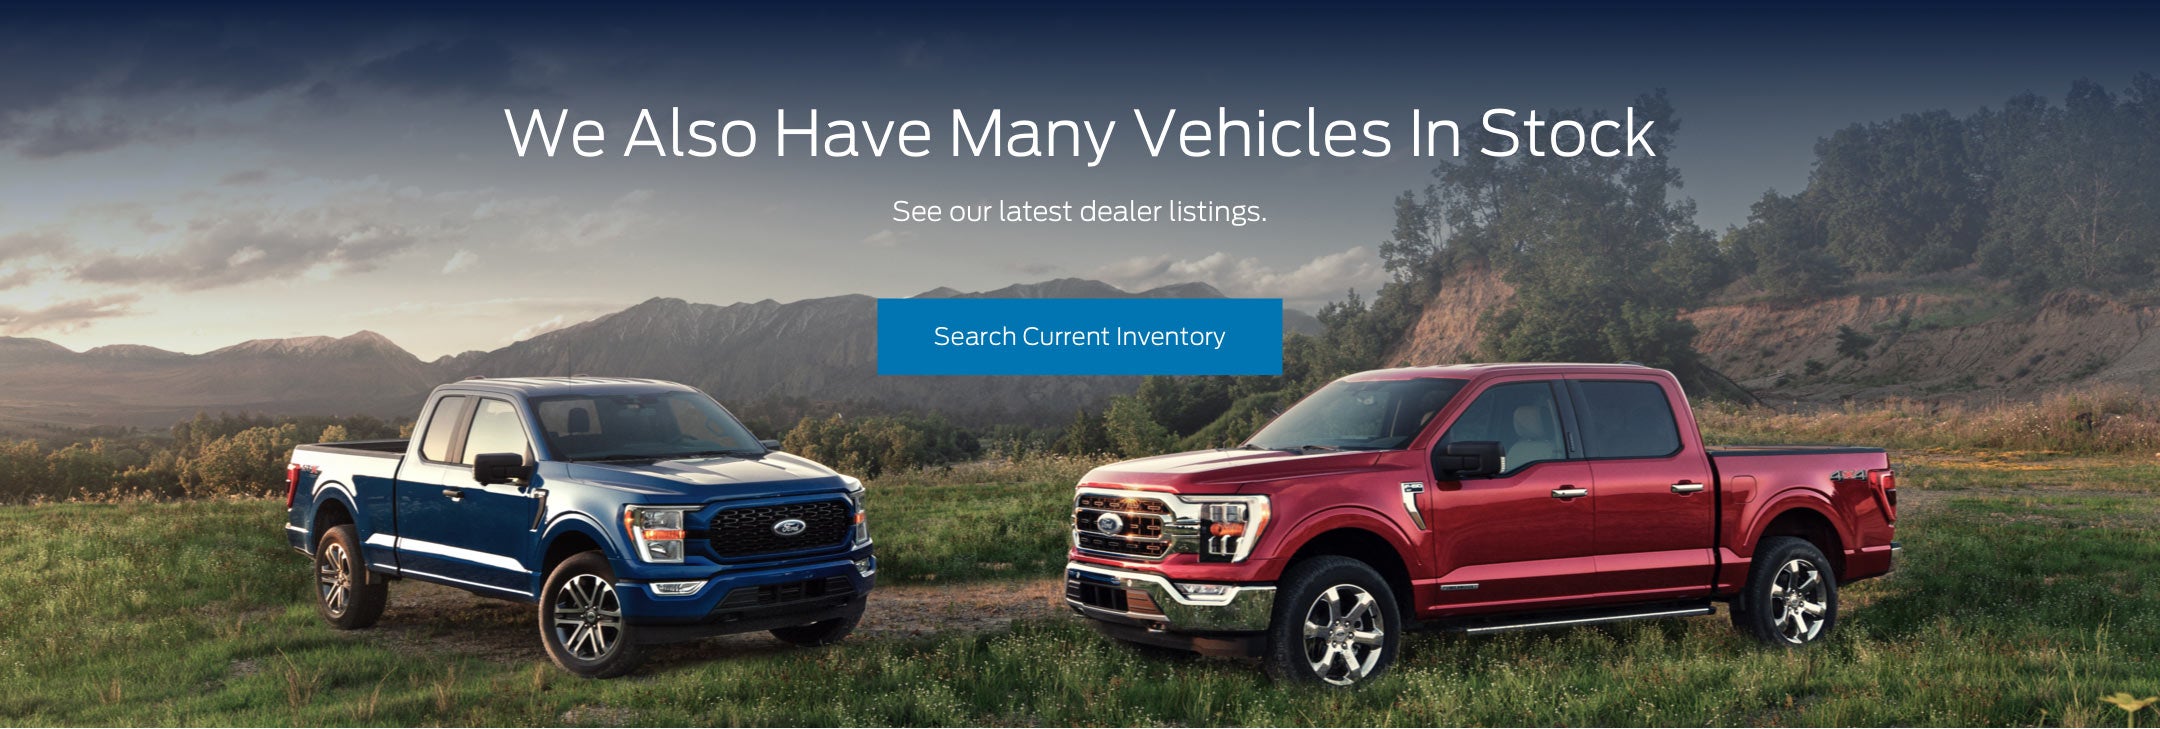 Ford vehicles in stock | Mark McLarty Ford in North Little Rock AR